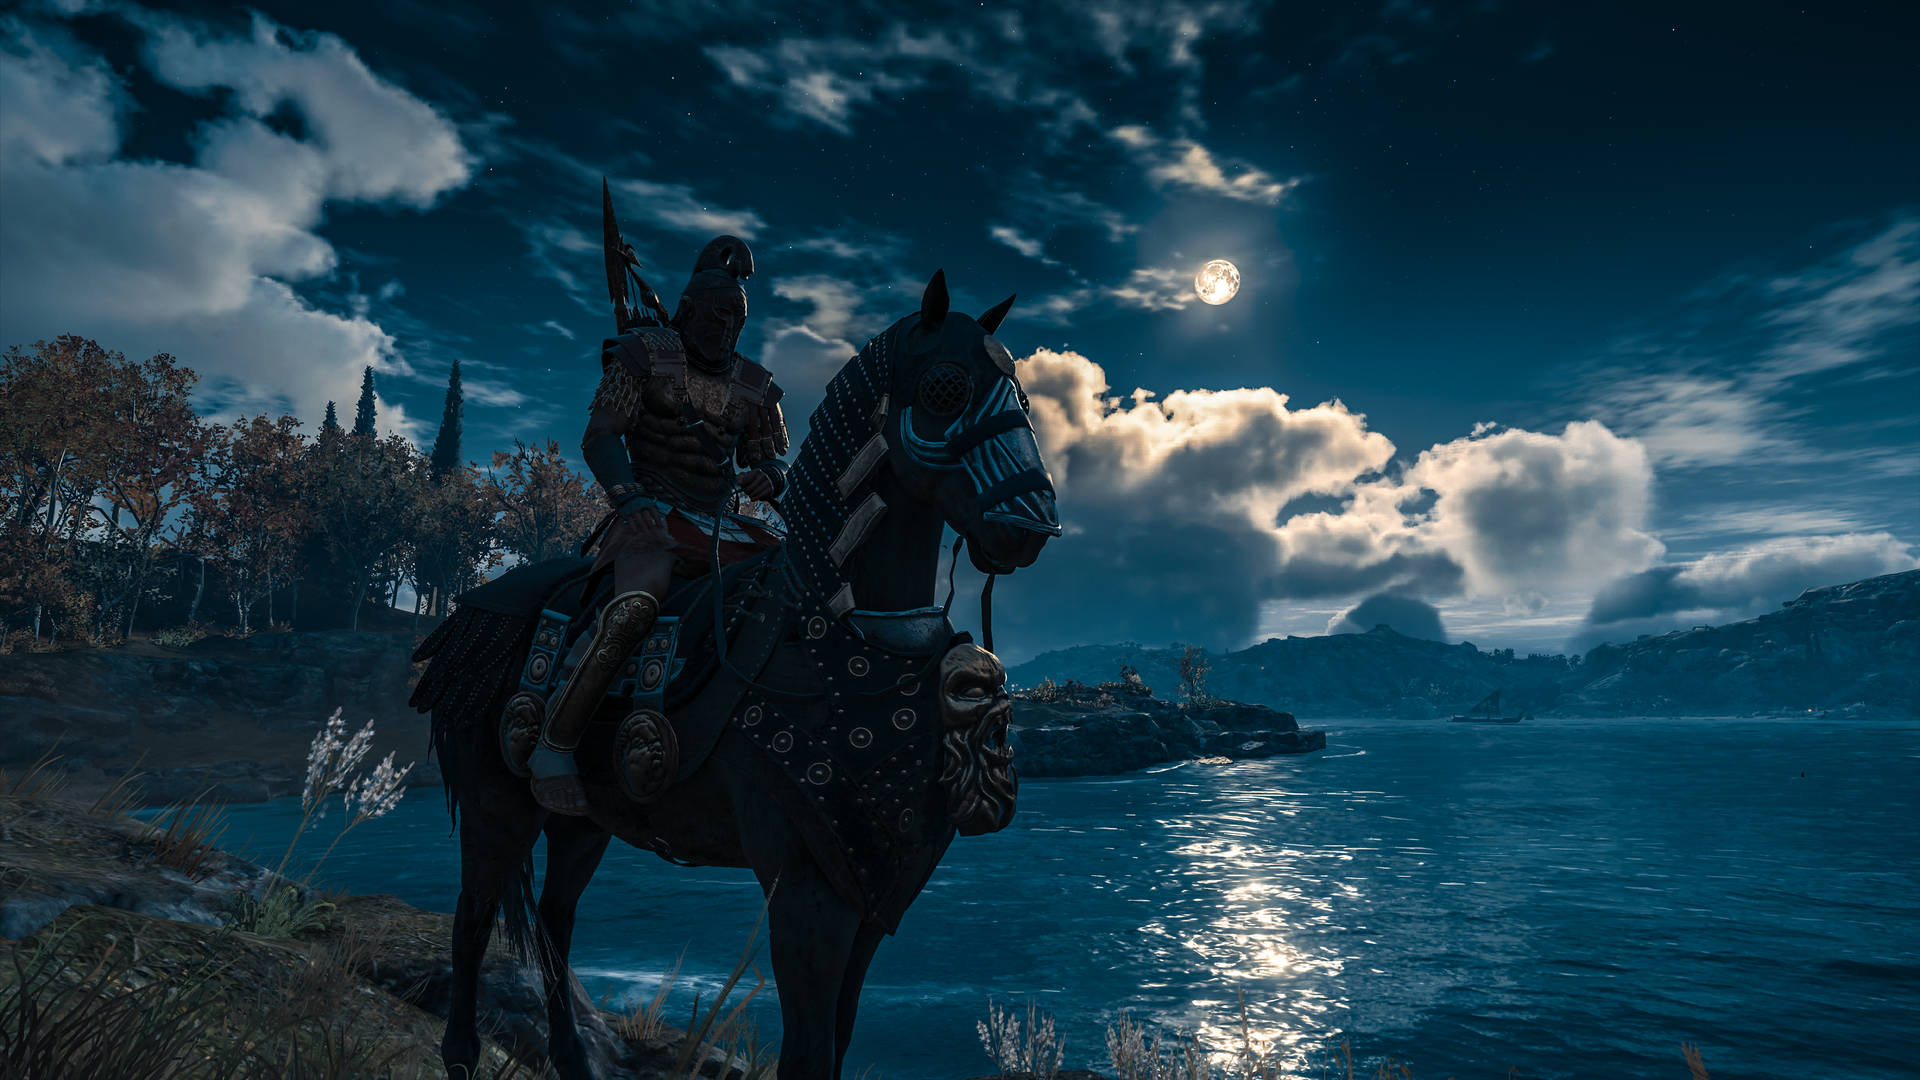 Assassin's Creed Odyssey Spartan Riding Horse